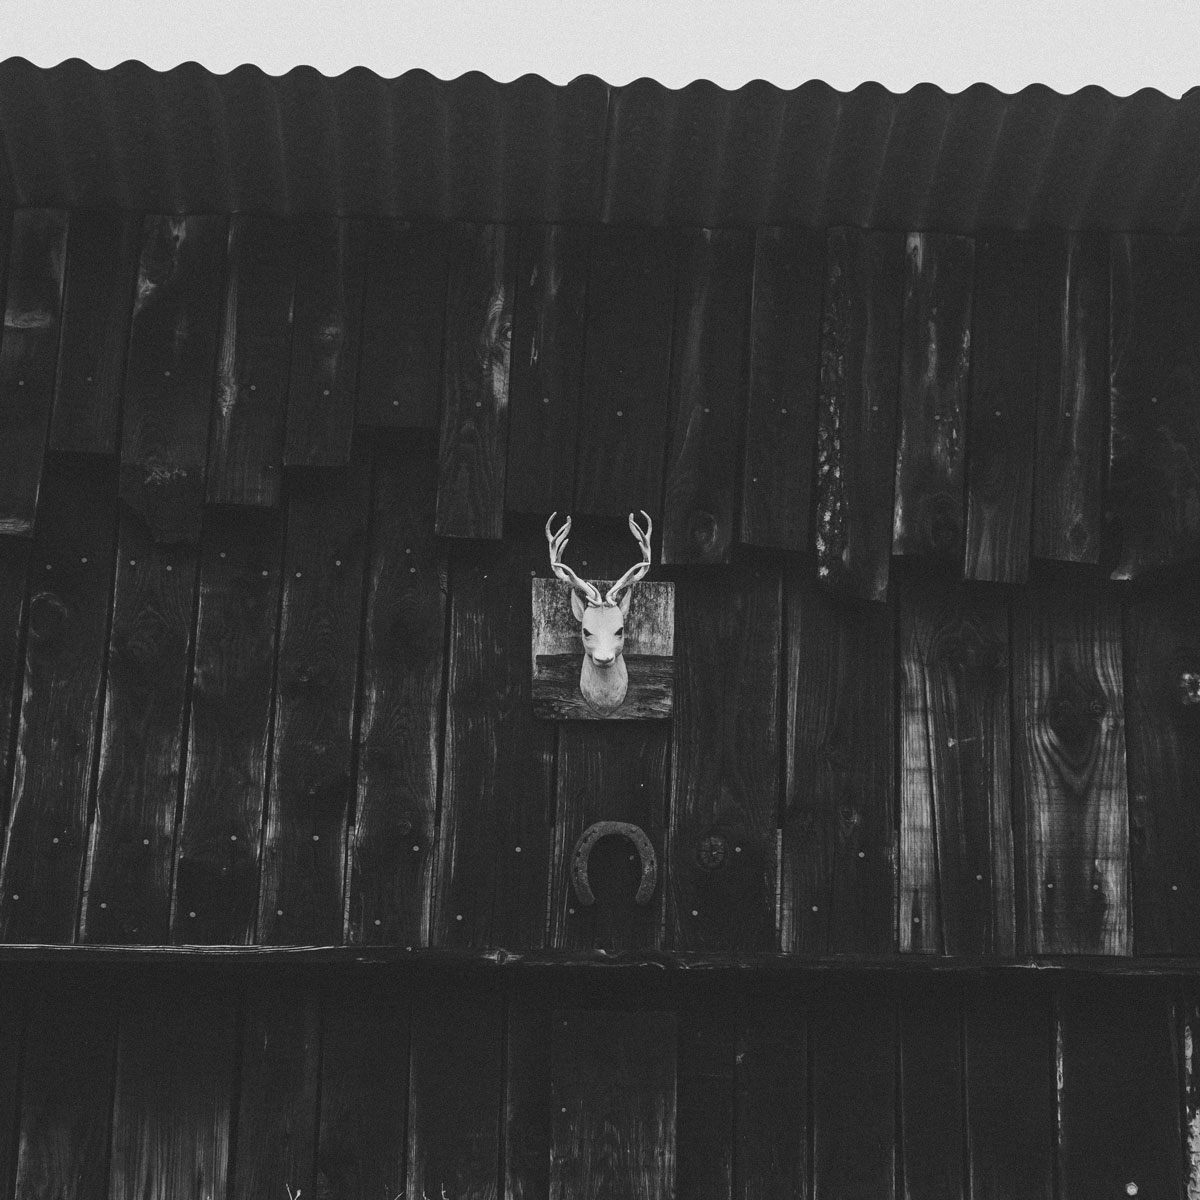 Black and white front of a shed with a metal roof and wooden planks walls. A deer head figure is mounted on it